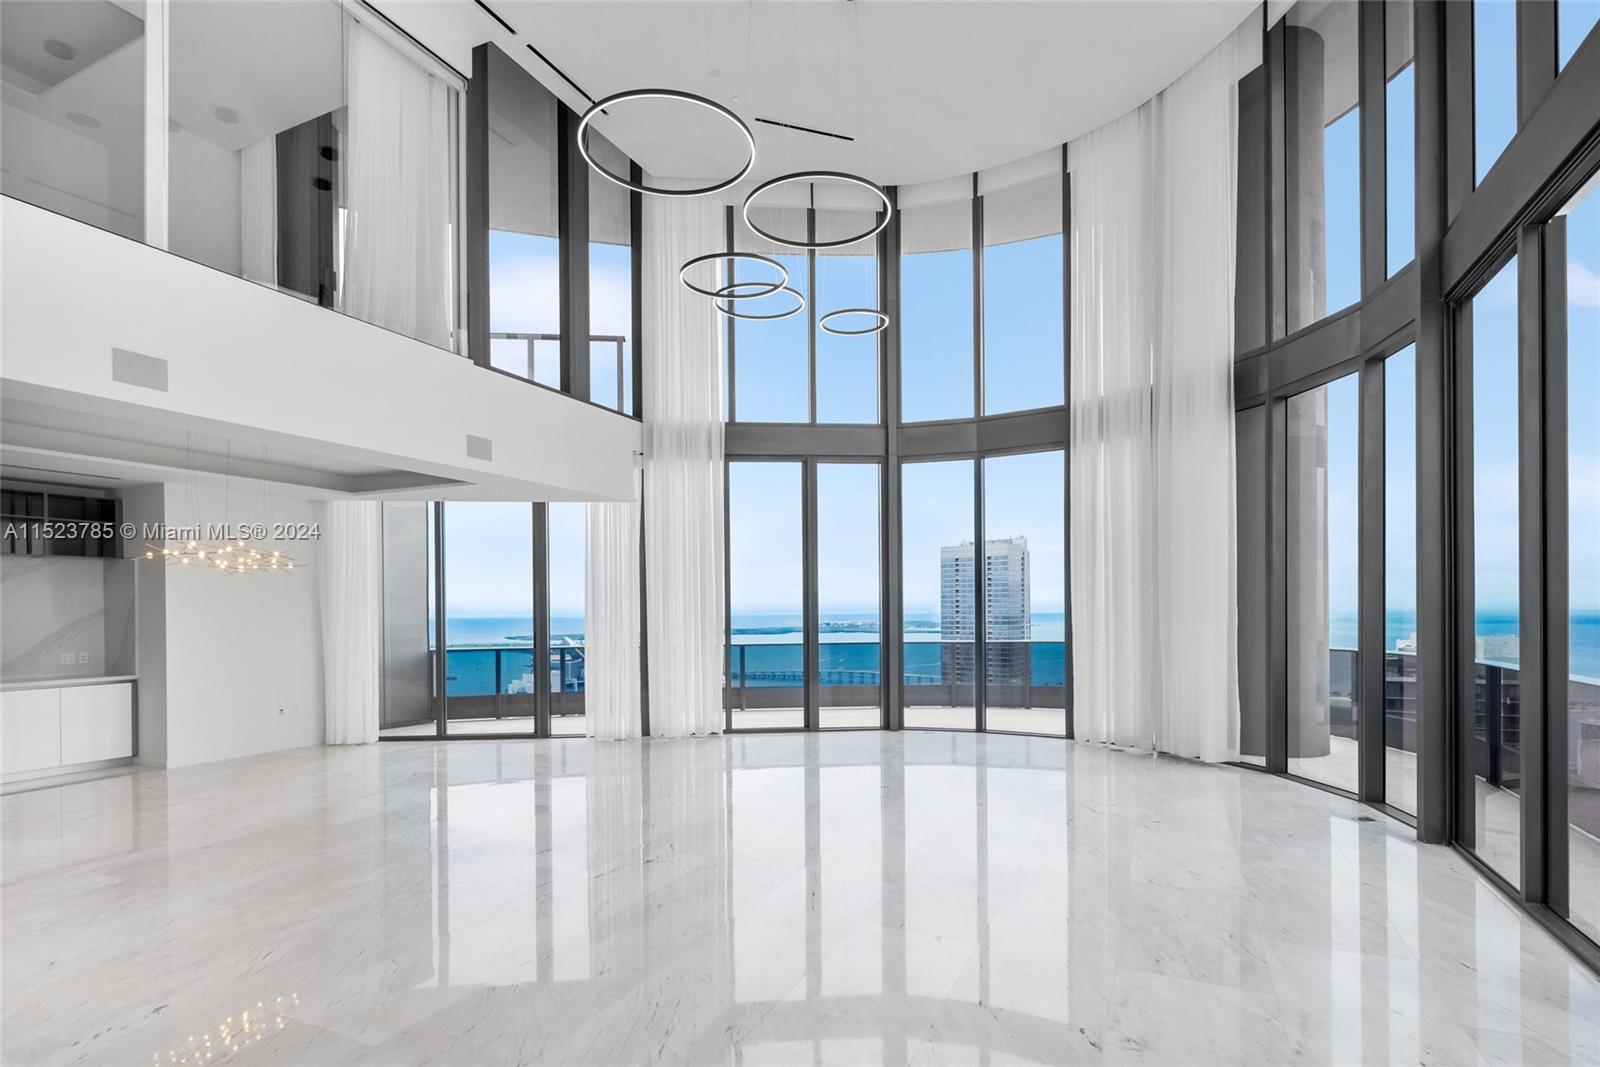 Experience ultimate luxury in this 5173 sq. ft. tri-level penthouse at The Brickell Flatiron. With 6 bedrooms and 5.5 bathrooms, indulge in spacious living. The private pool deck offers 180-degree views, an outdoor kitchen, and an ideal space for gatherings. Italian marble flooring adds opulence. Enjoy 3 assigned parking spaces, valet parking, and exclusive amenities: roof deck, playground, doorman, concierge, gym, playroom, billiards, 2 heated pools, game room, business center. Revel in highrise living near Miami's finest dining, shopping, and entertainment. Rare Miami luxury awaits! Estimated completion is set for April 2024.